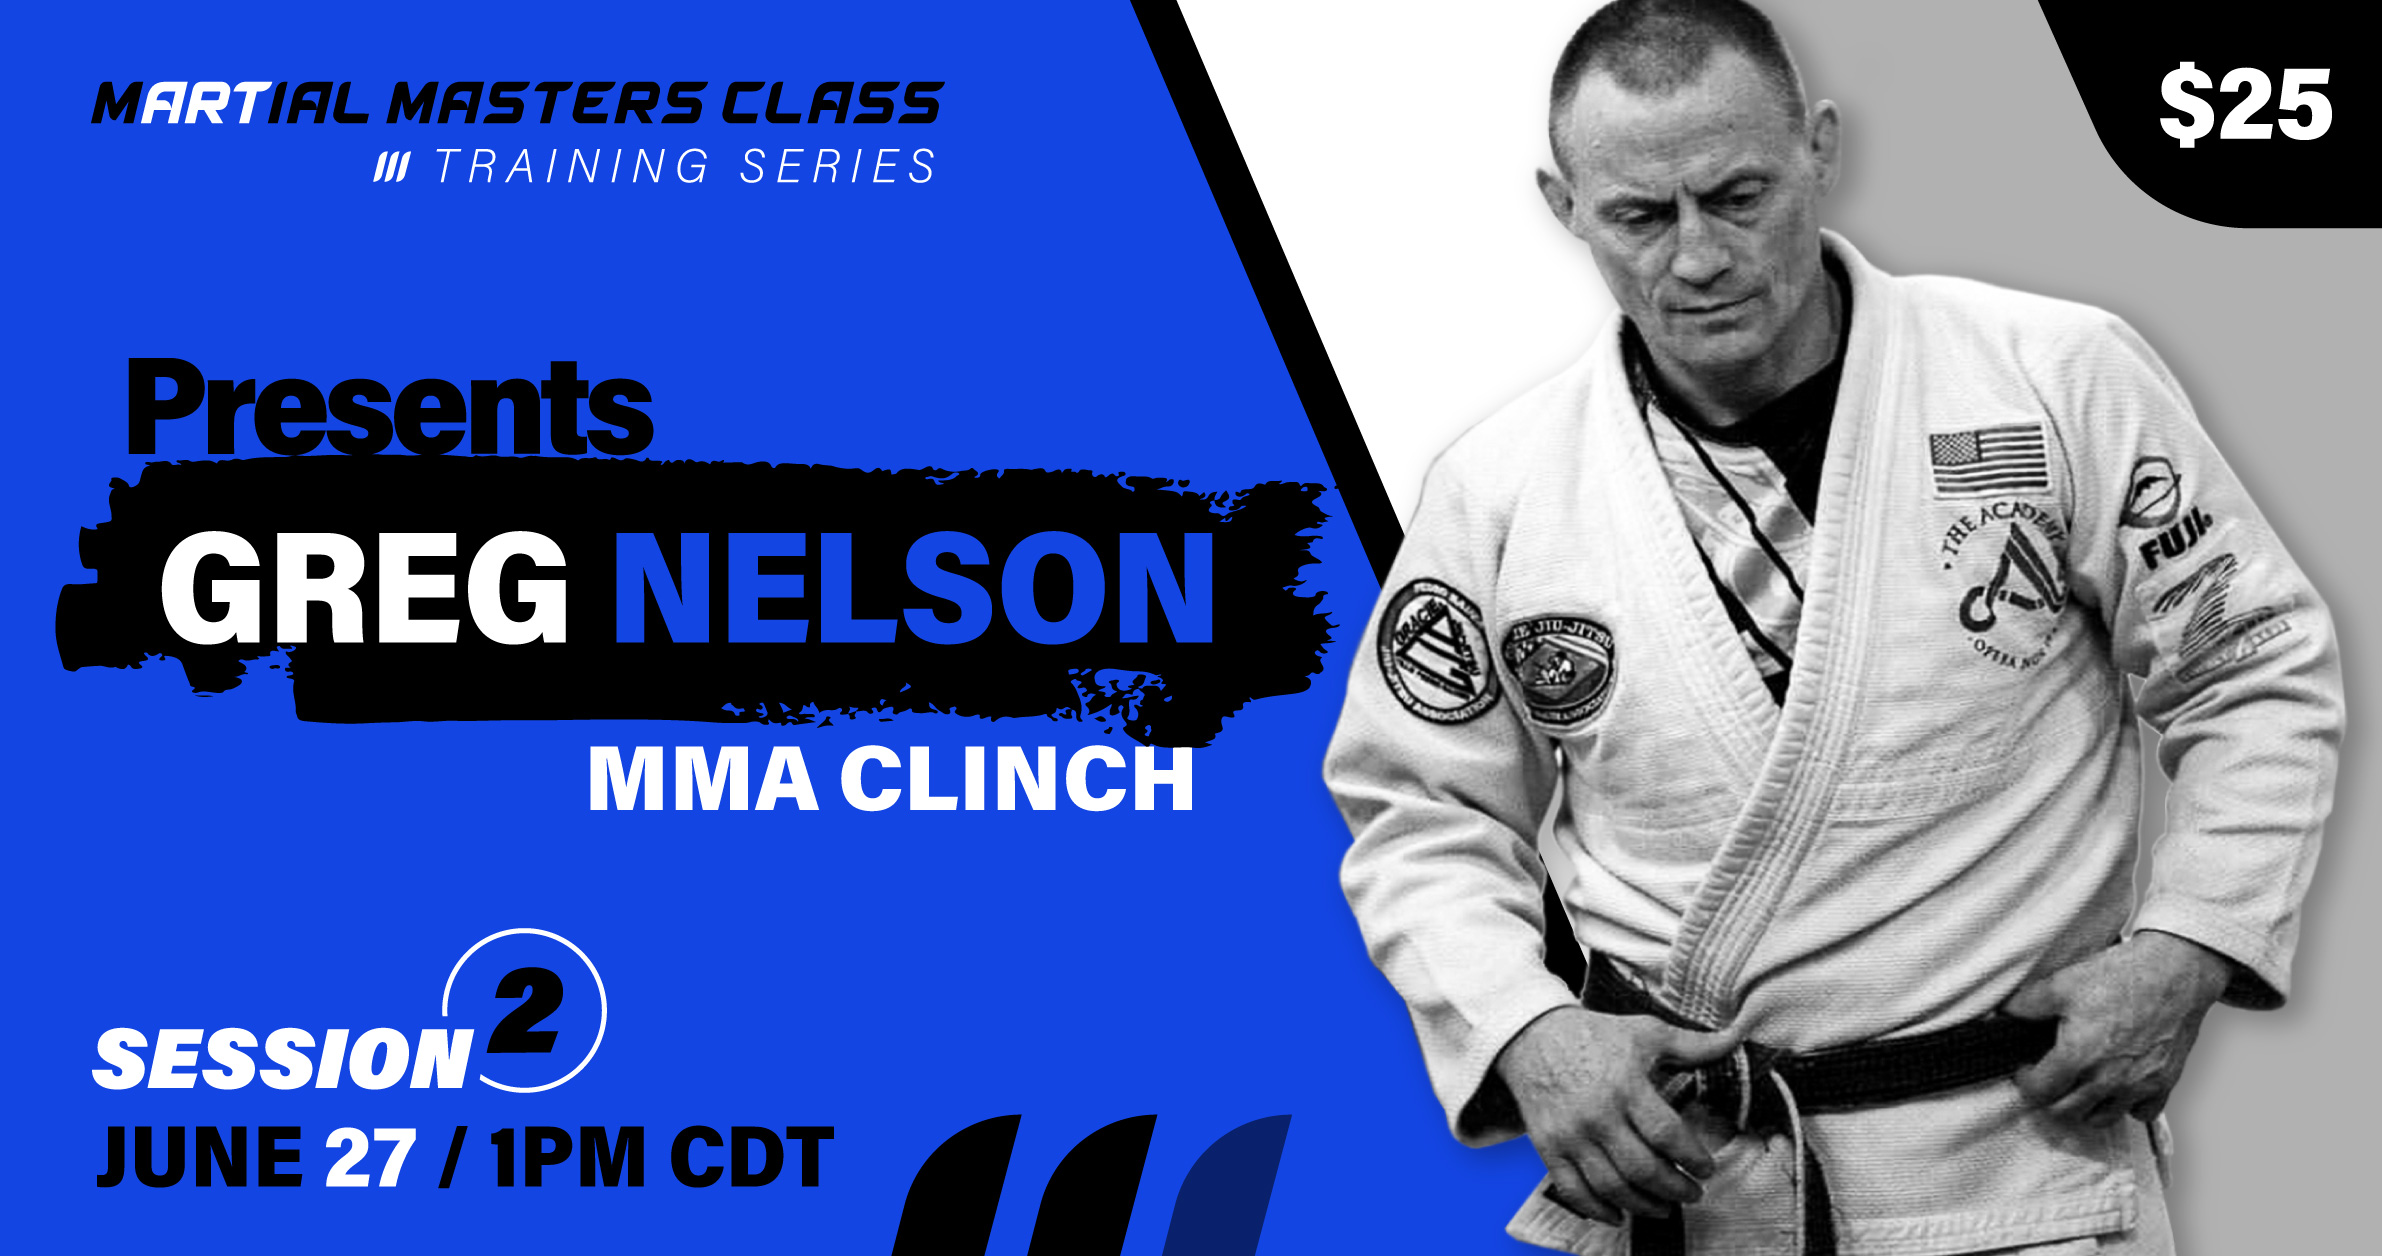 Martial Masters Class Presents Greg Nelson MMA Clinch MARS Online